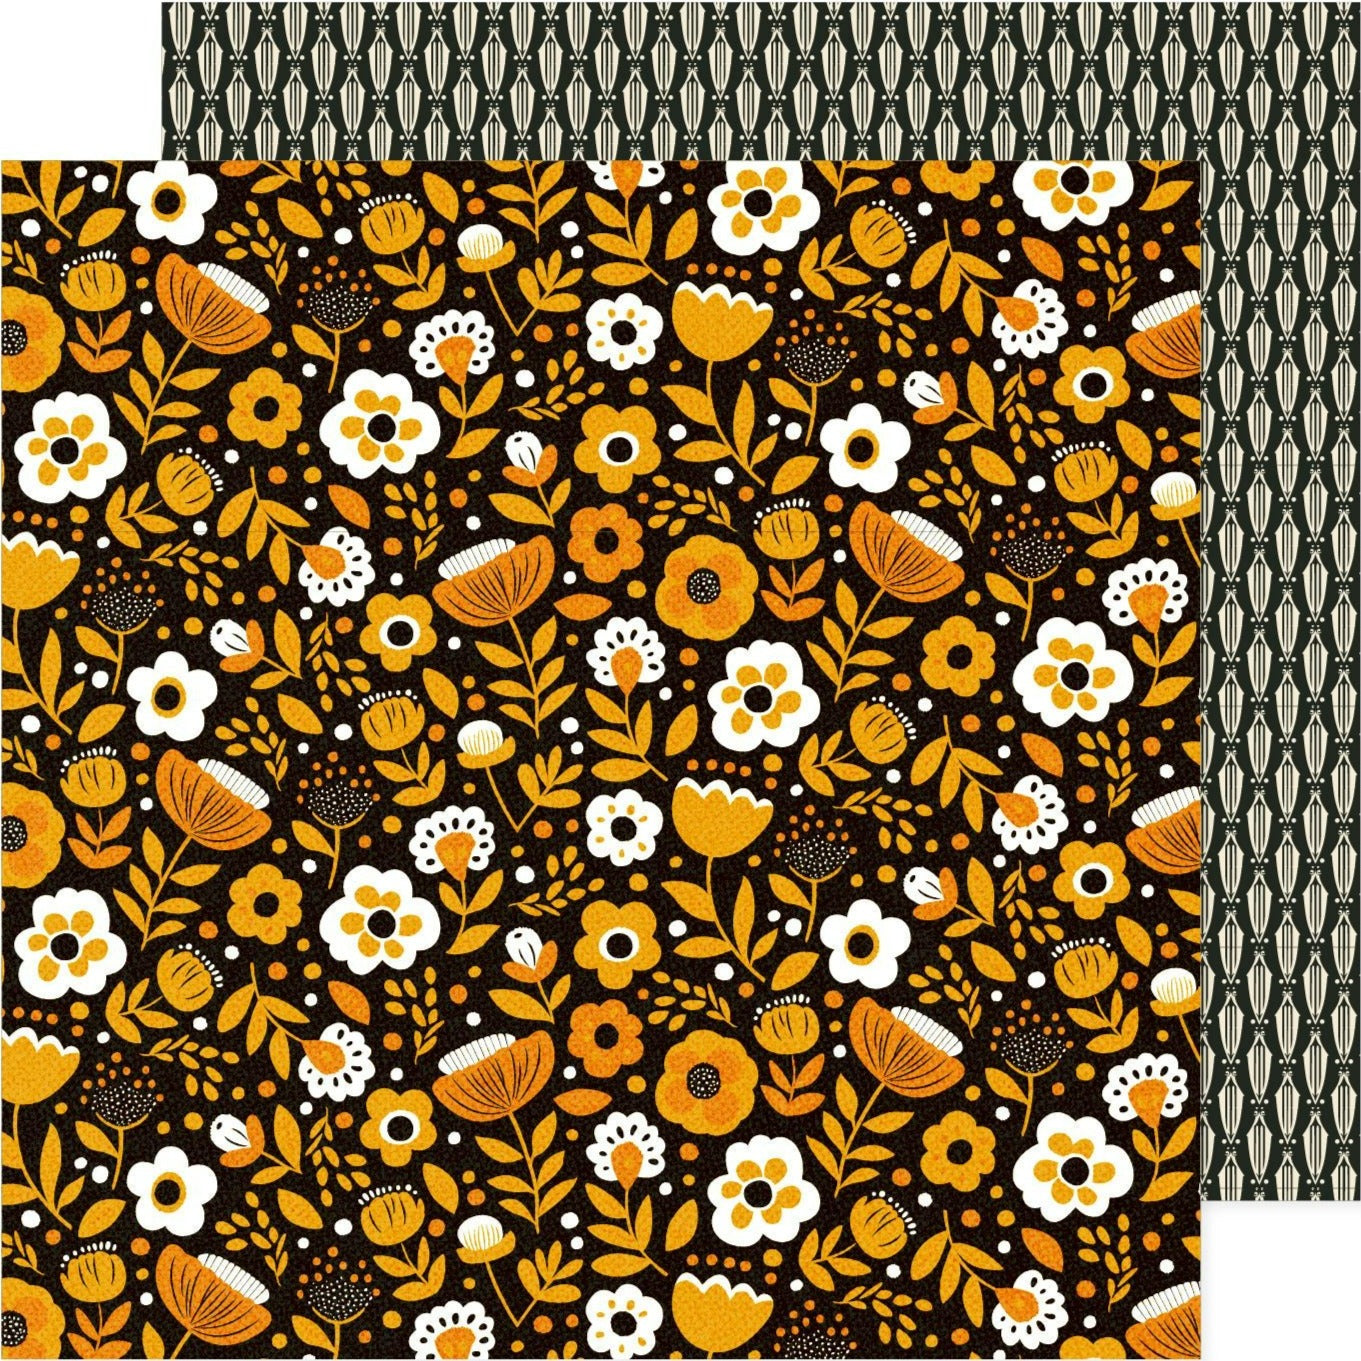 12x12 patterned cardstock. (Side A - orange vintage floral pattern on a black background, Side B - black and cream geometric pattern) - Archival-safe and acid-free from American Crafts